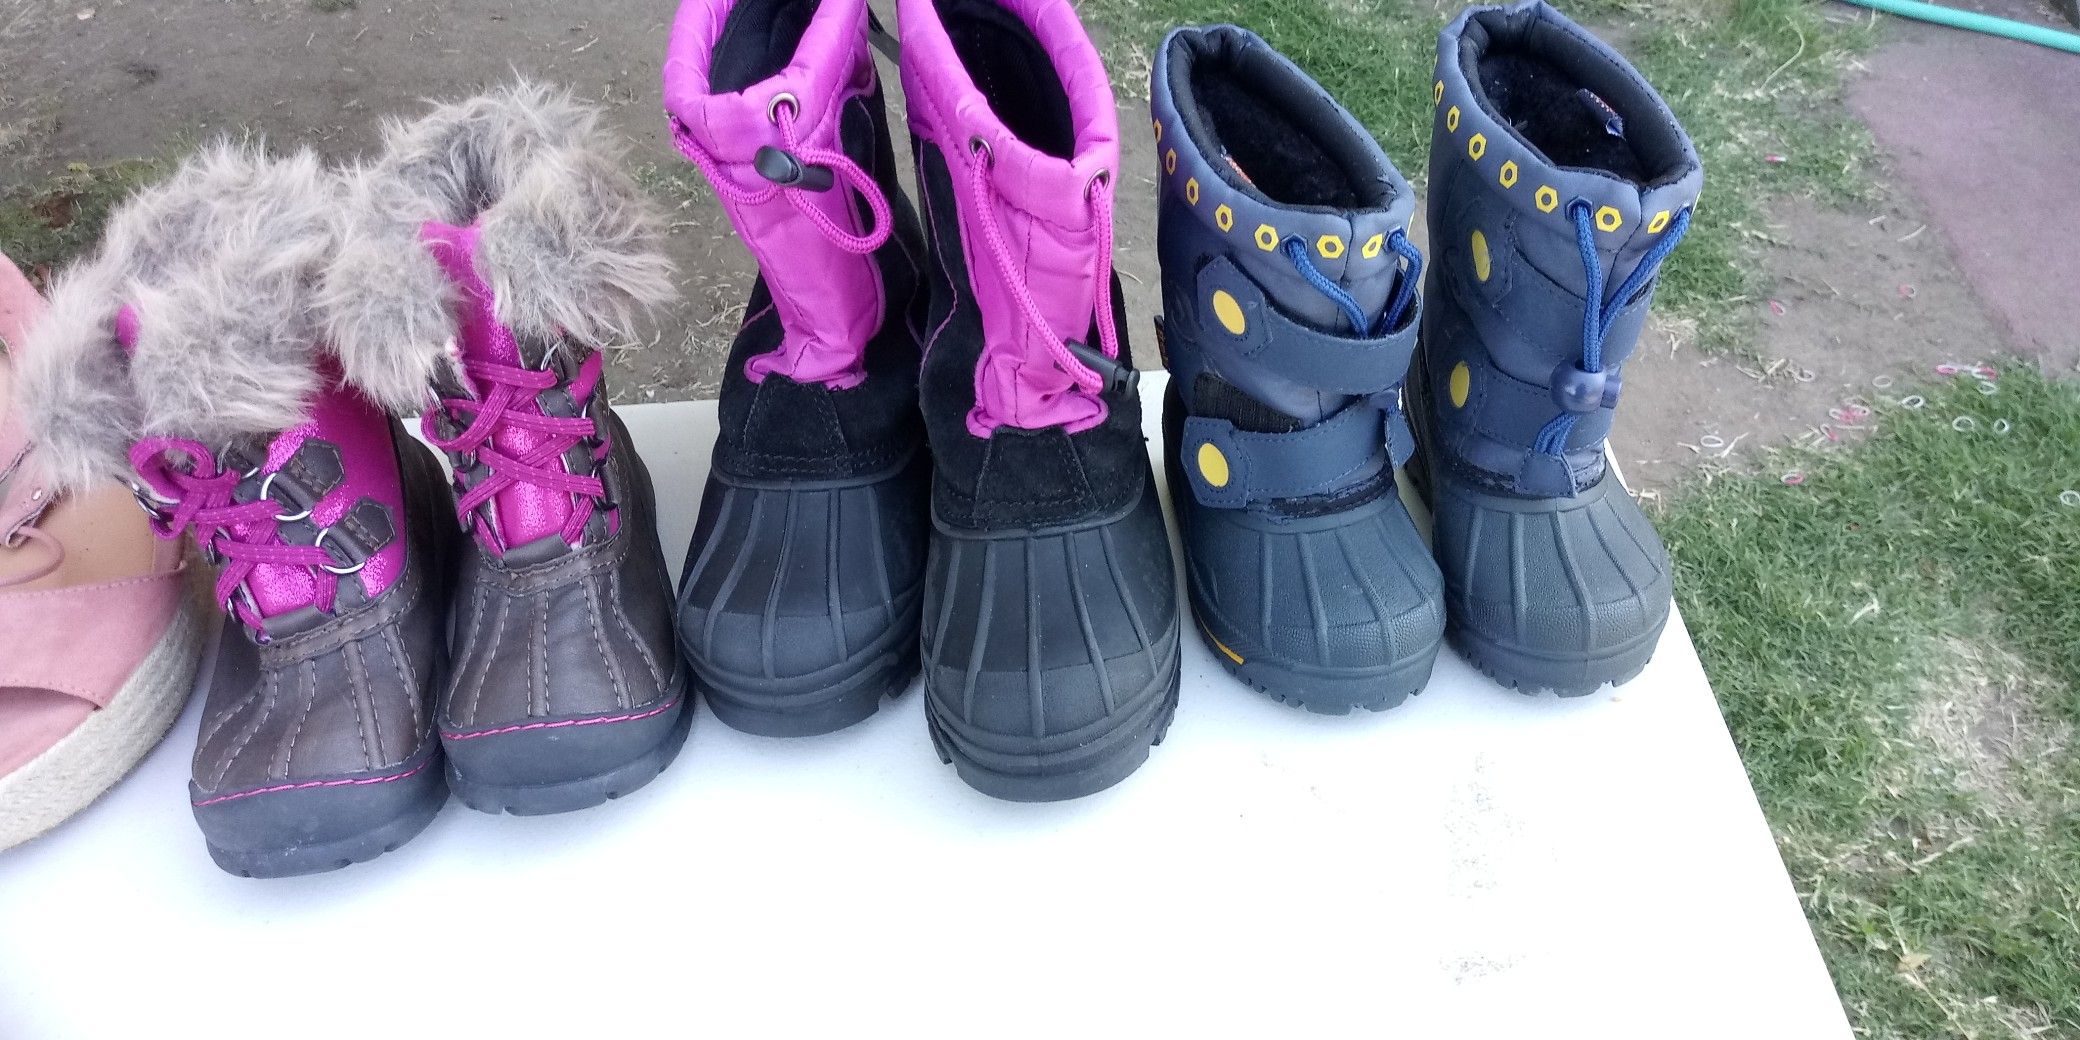 Snow boots size 5/6 13 and 11 snow bib size 18 months and snow gloves